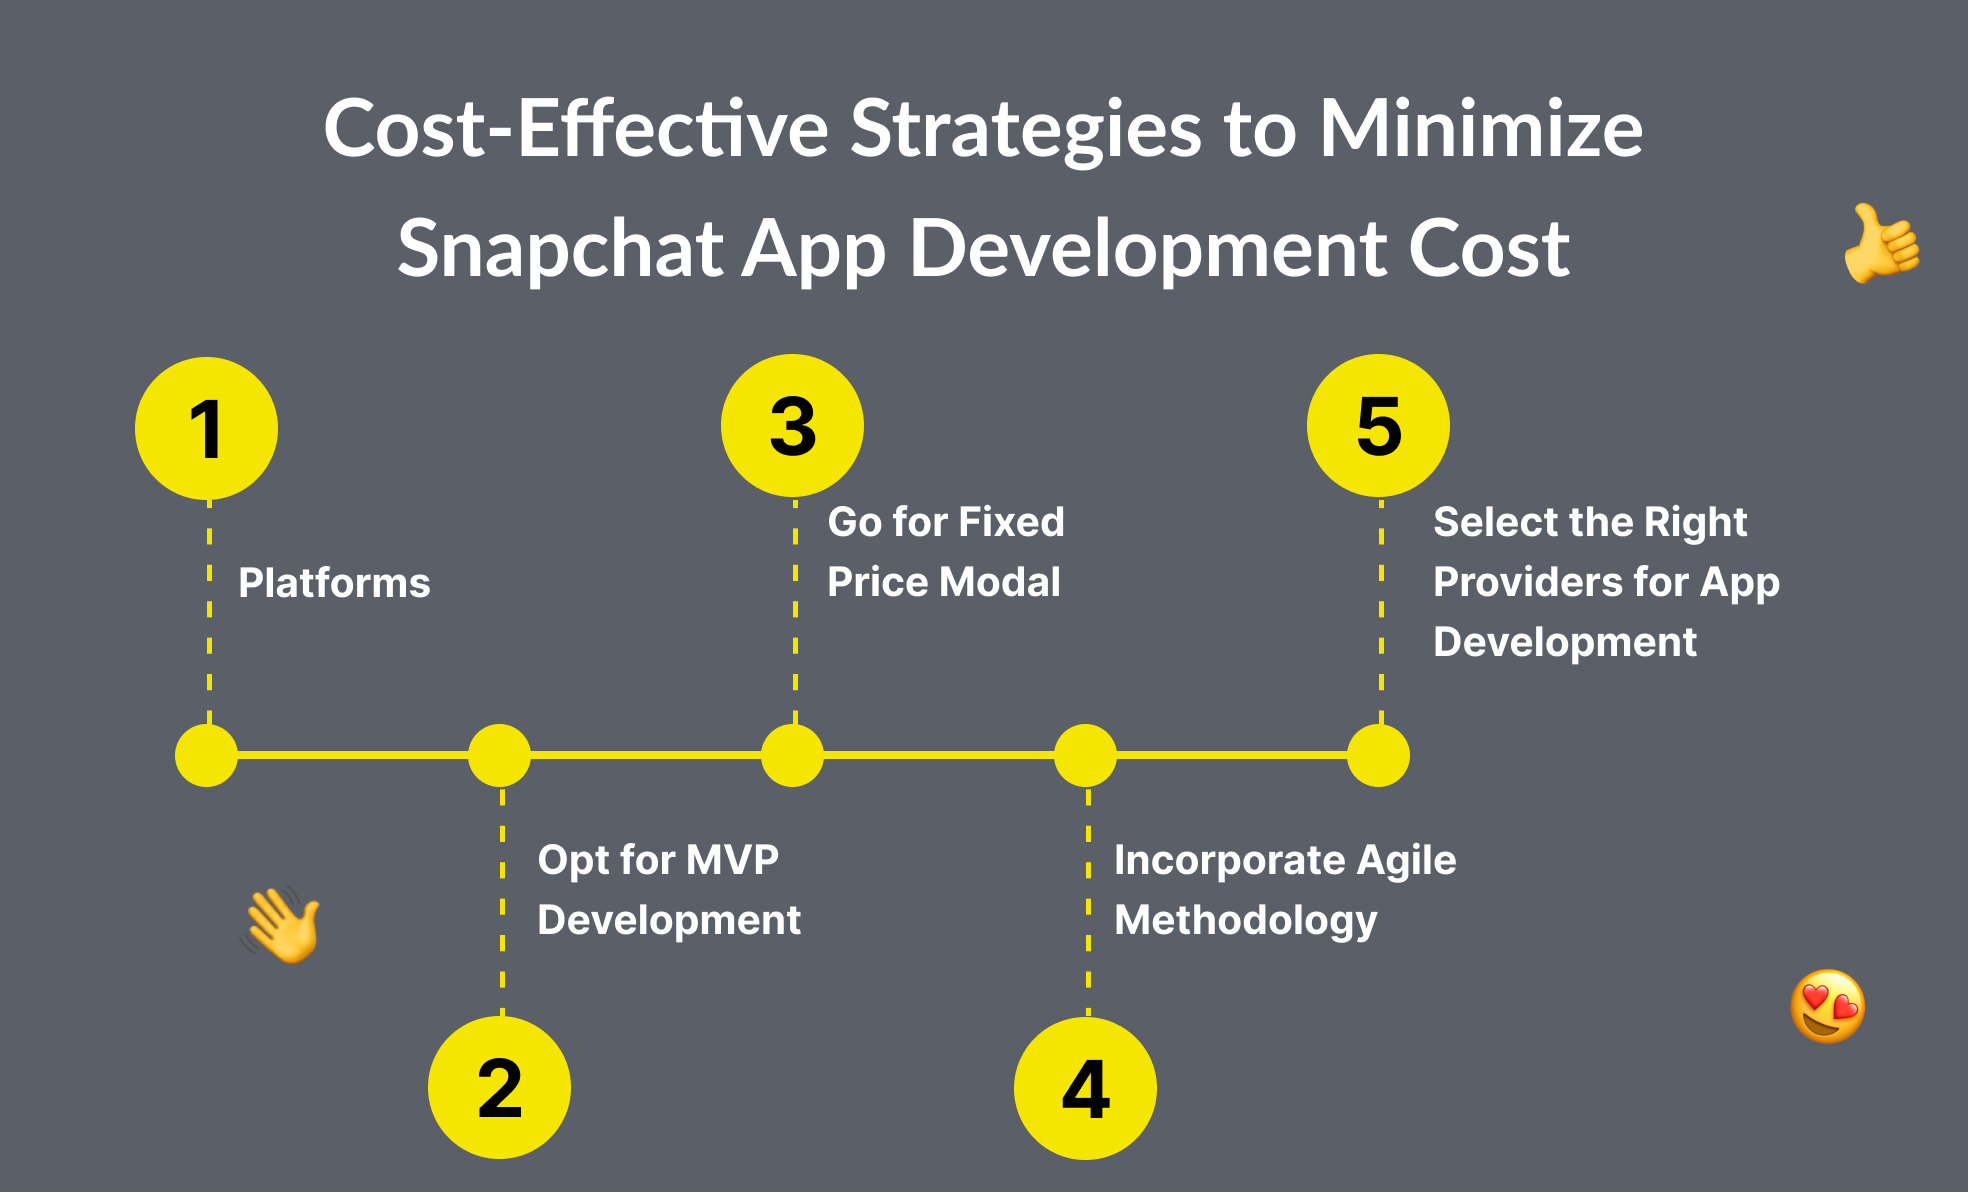 Cost-Effective Strategies to Minimize Snapchat App Development Cost